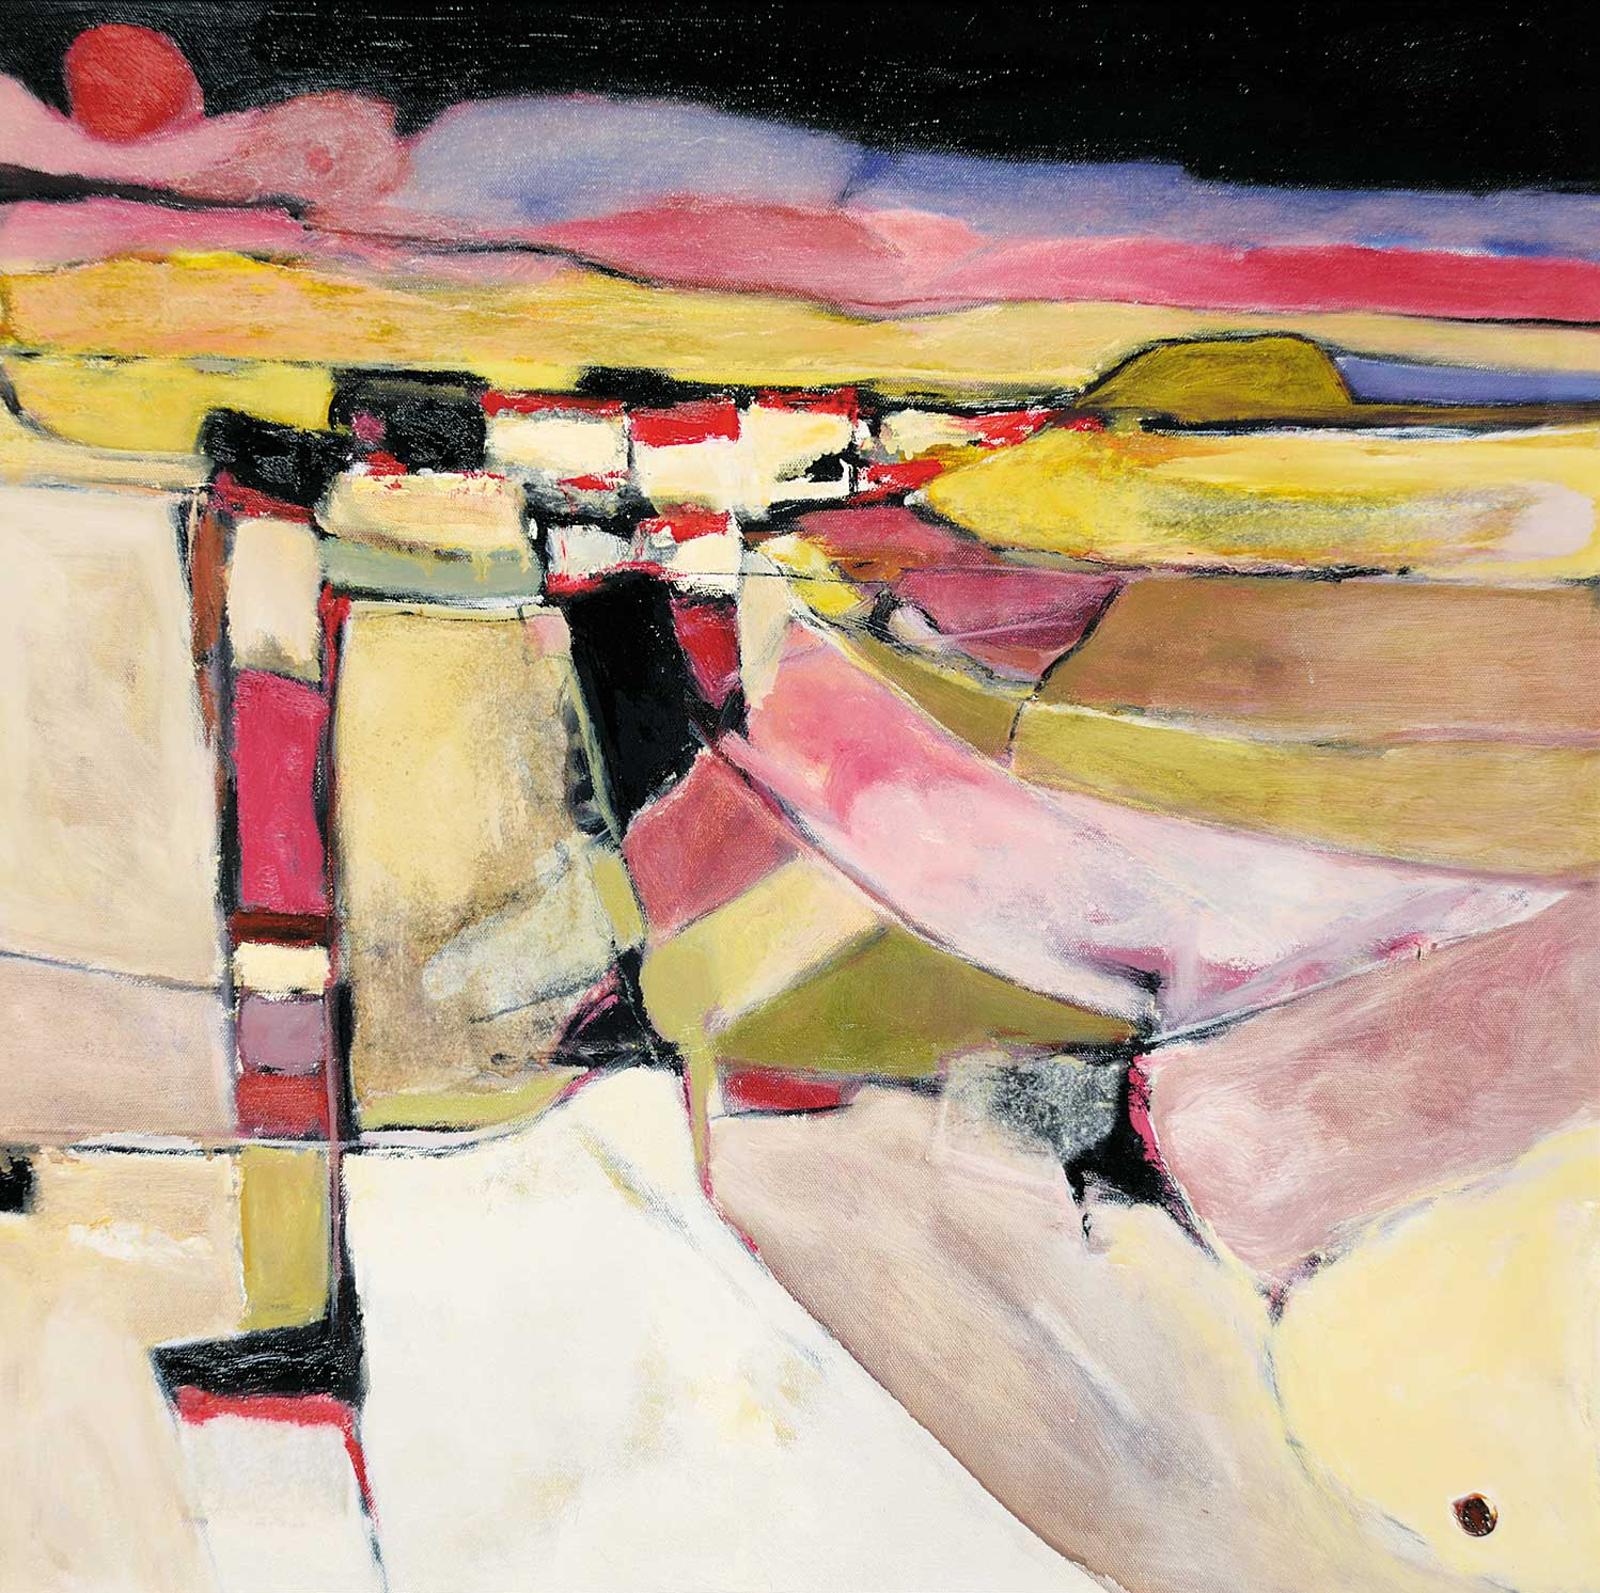 H.E. [Ebe] Kuckein (1930-2015) - Untitled - Abstract Landscape